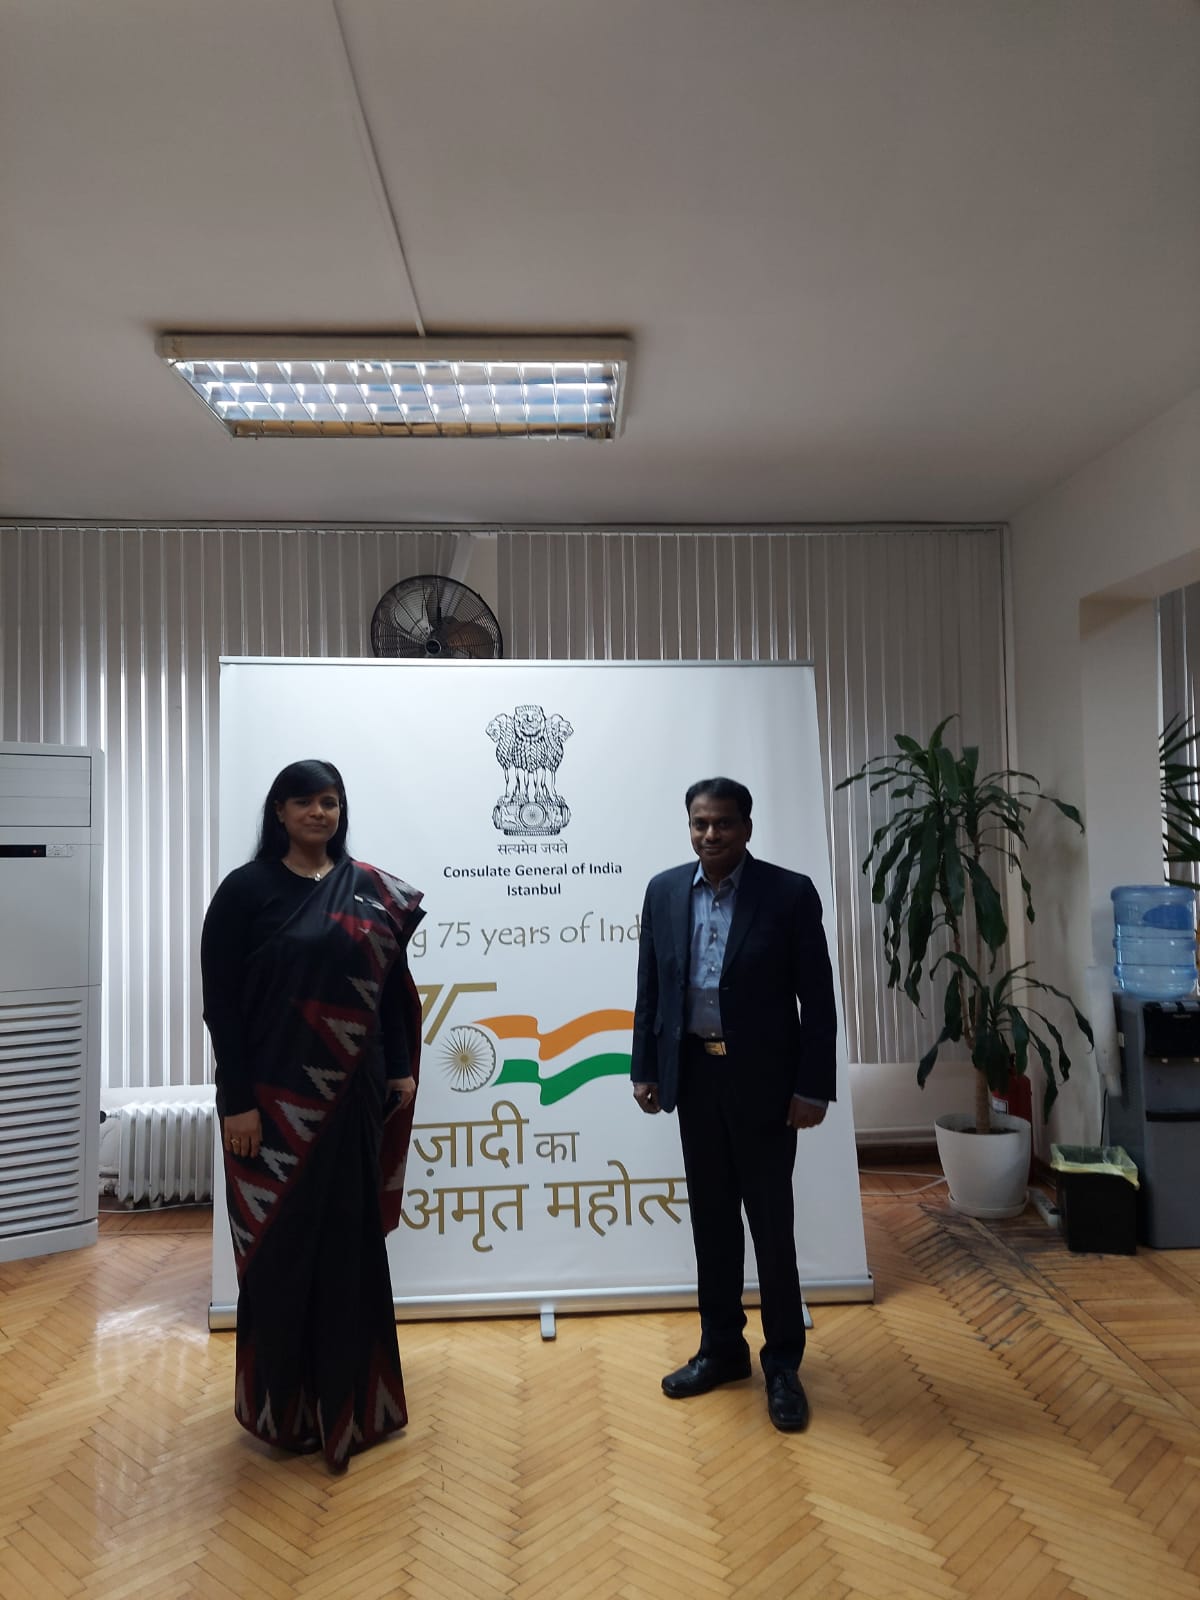 Shri A. Ravi Kumar, Additional Director, Texprocil with the Consul General of India, Ms. Sudhi Choudhury at the office of the Consulate General of India in Istanbul, Turkey held from - February 24-26, 2022